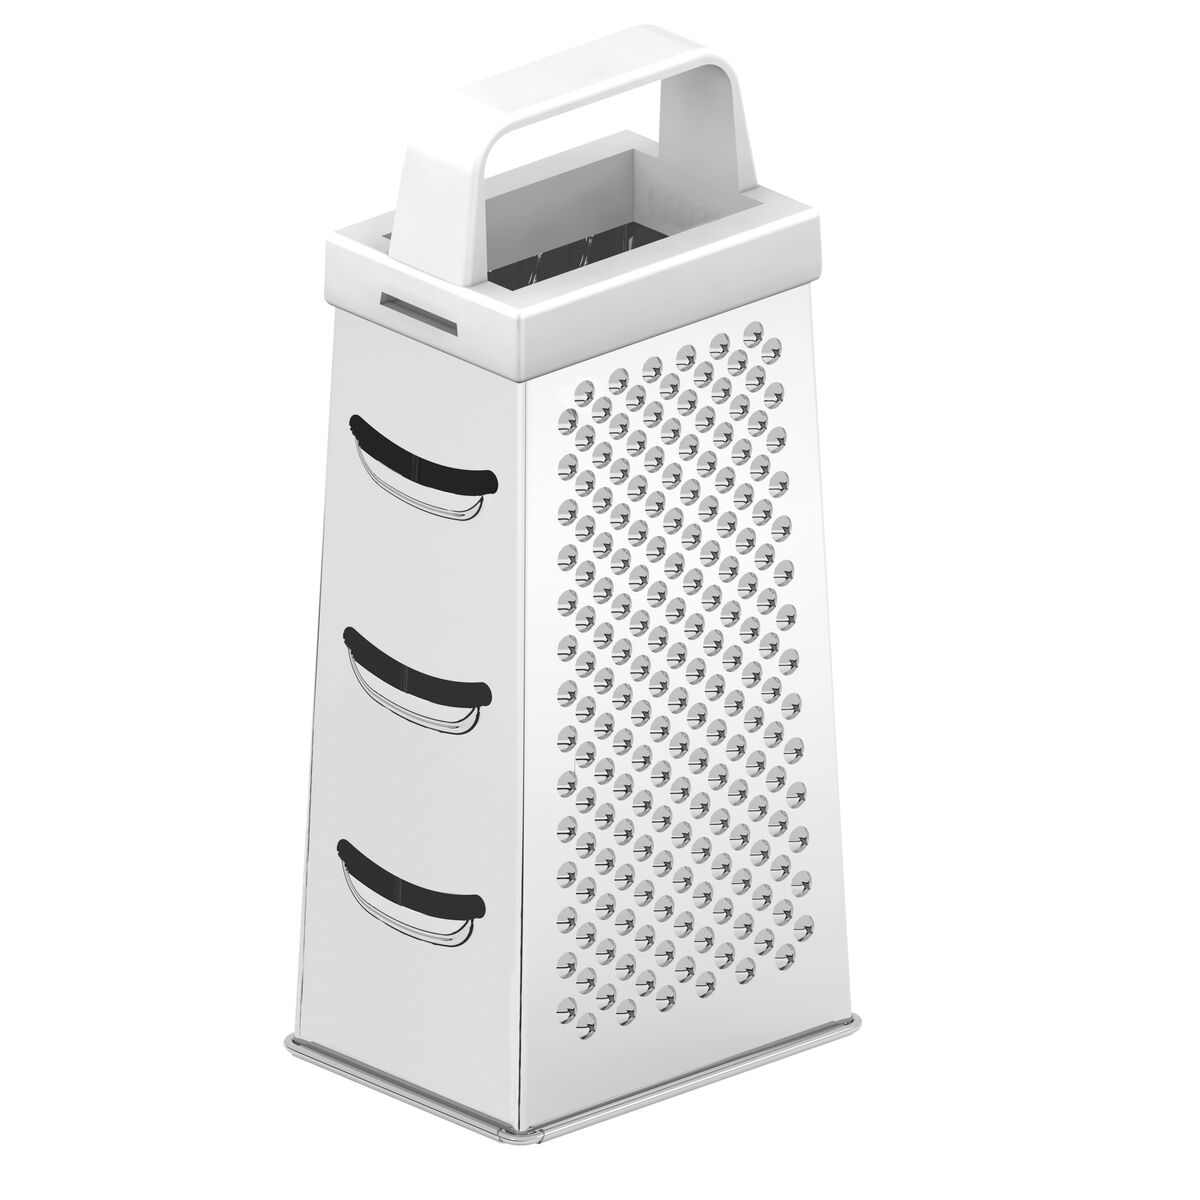 4 sided grater